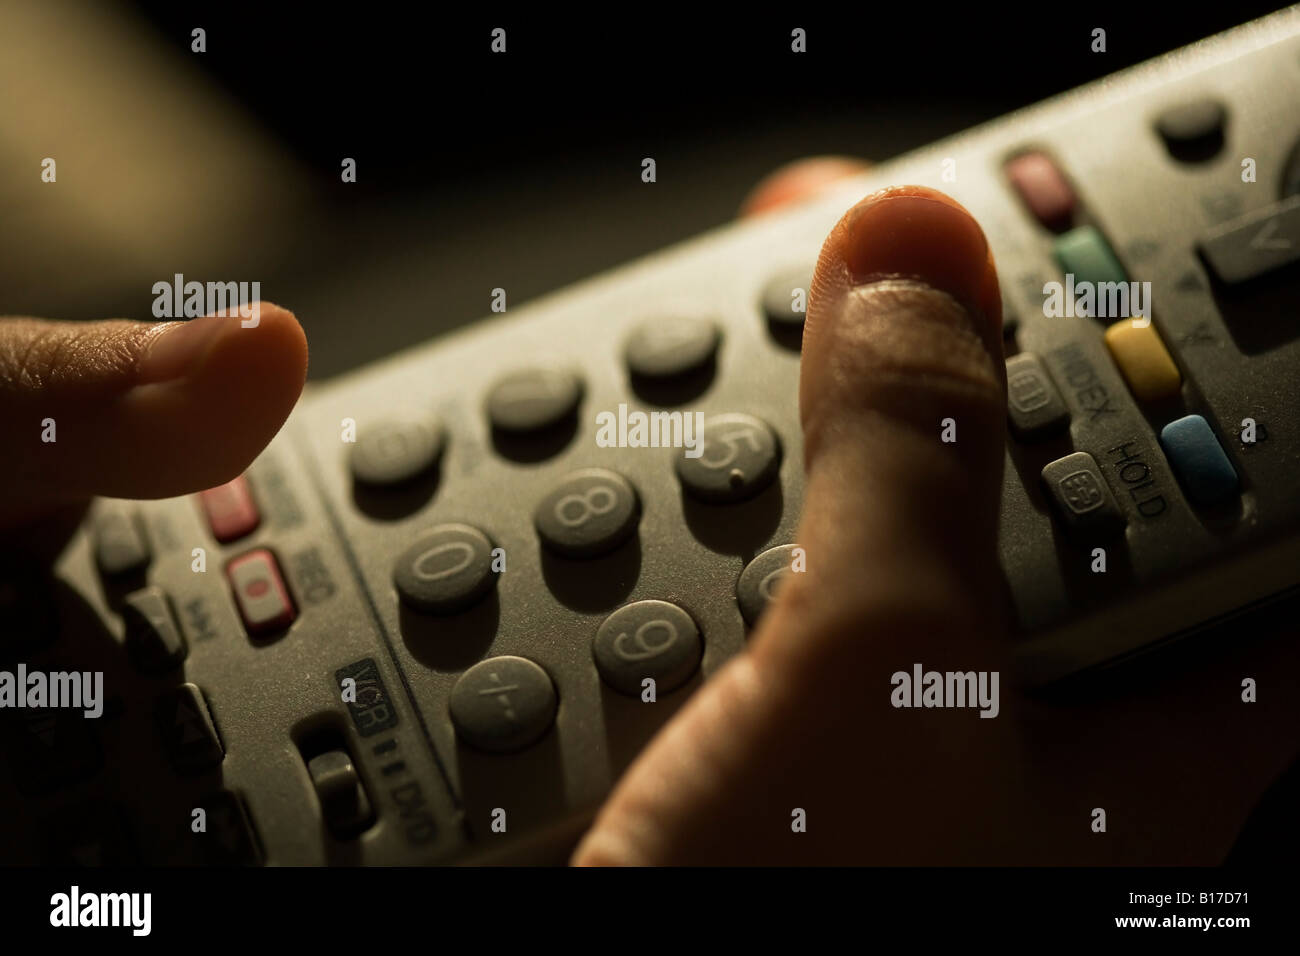 TV remote control in hands of six year old boy Stock Photo